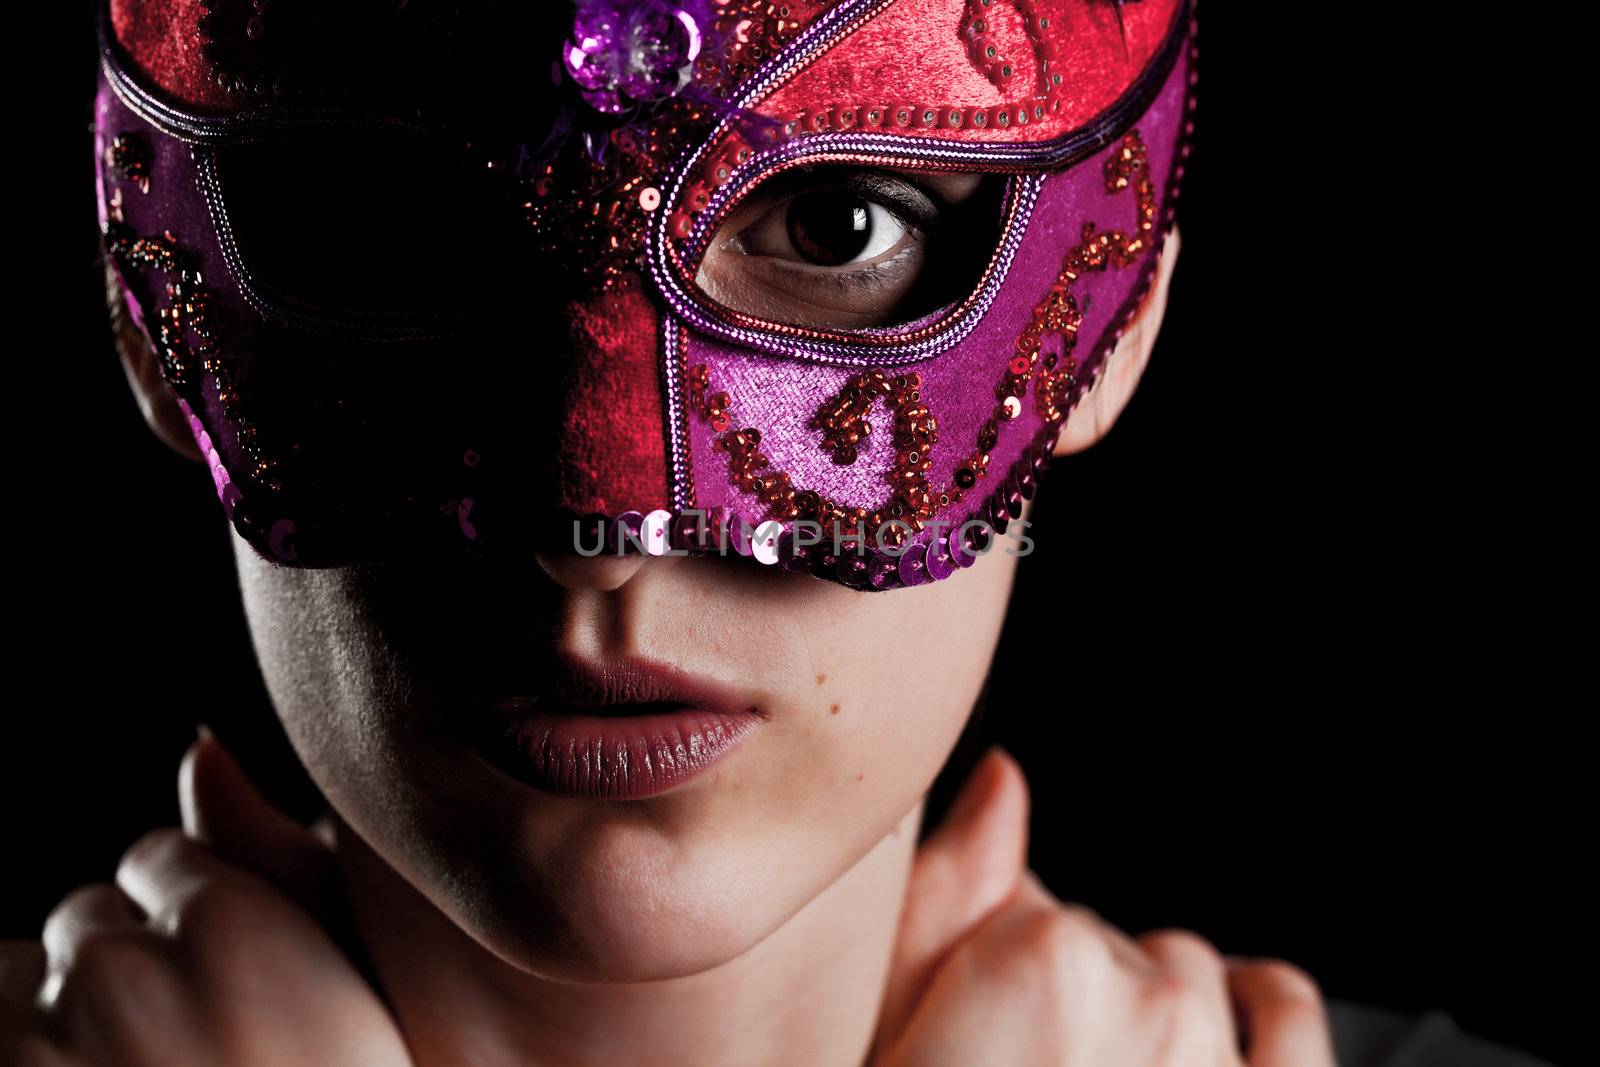 Elegant young girl with carnival mask against black background